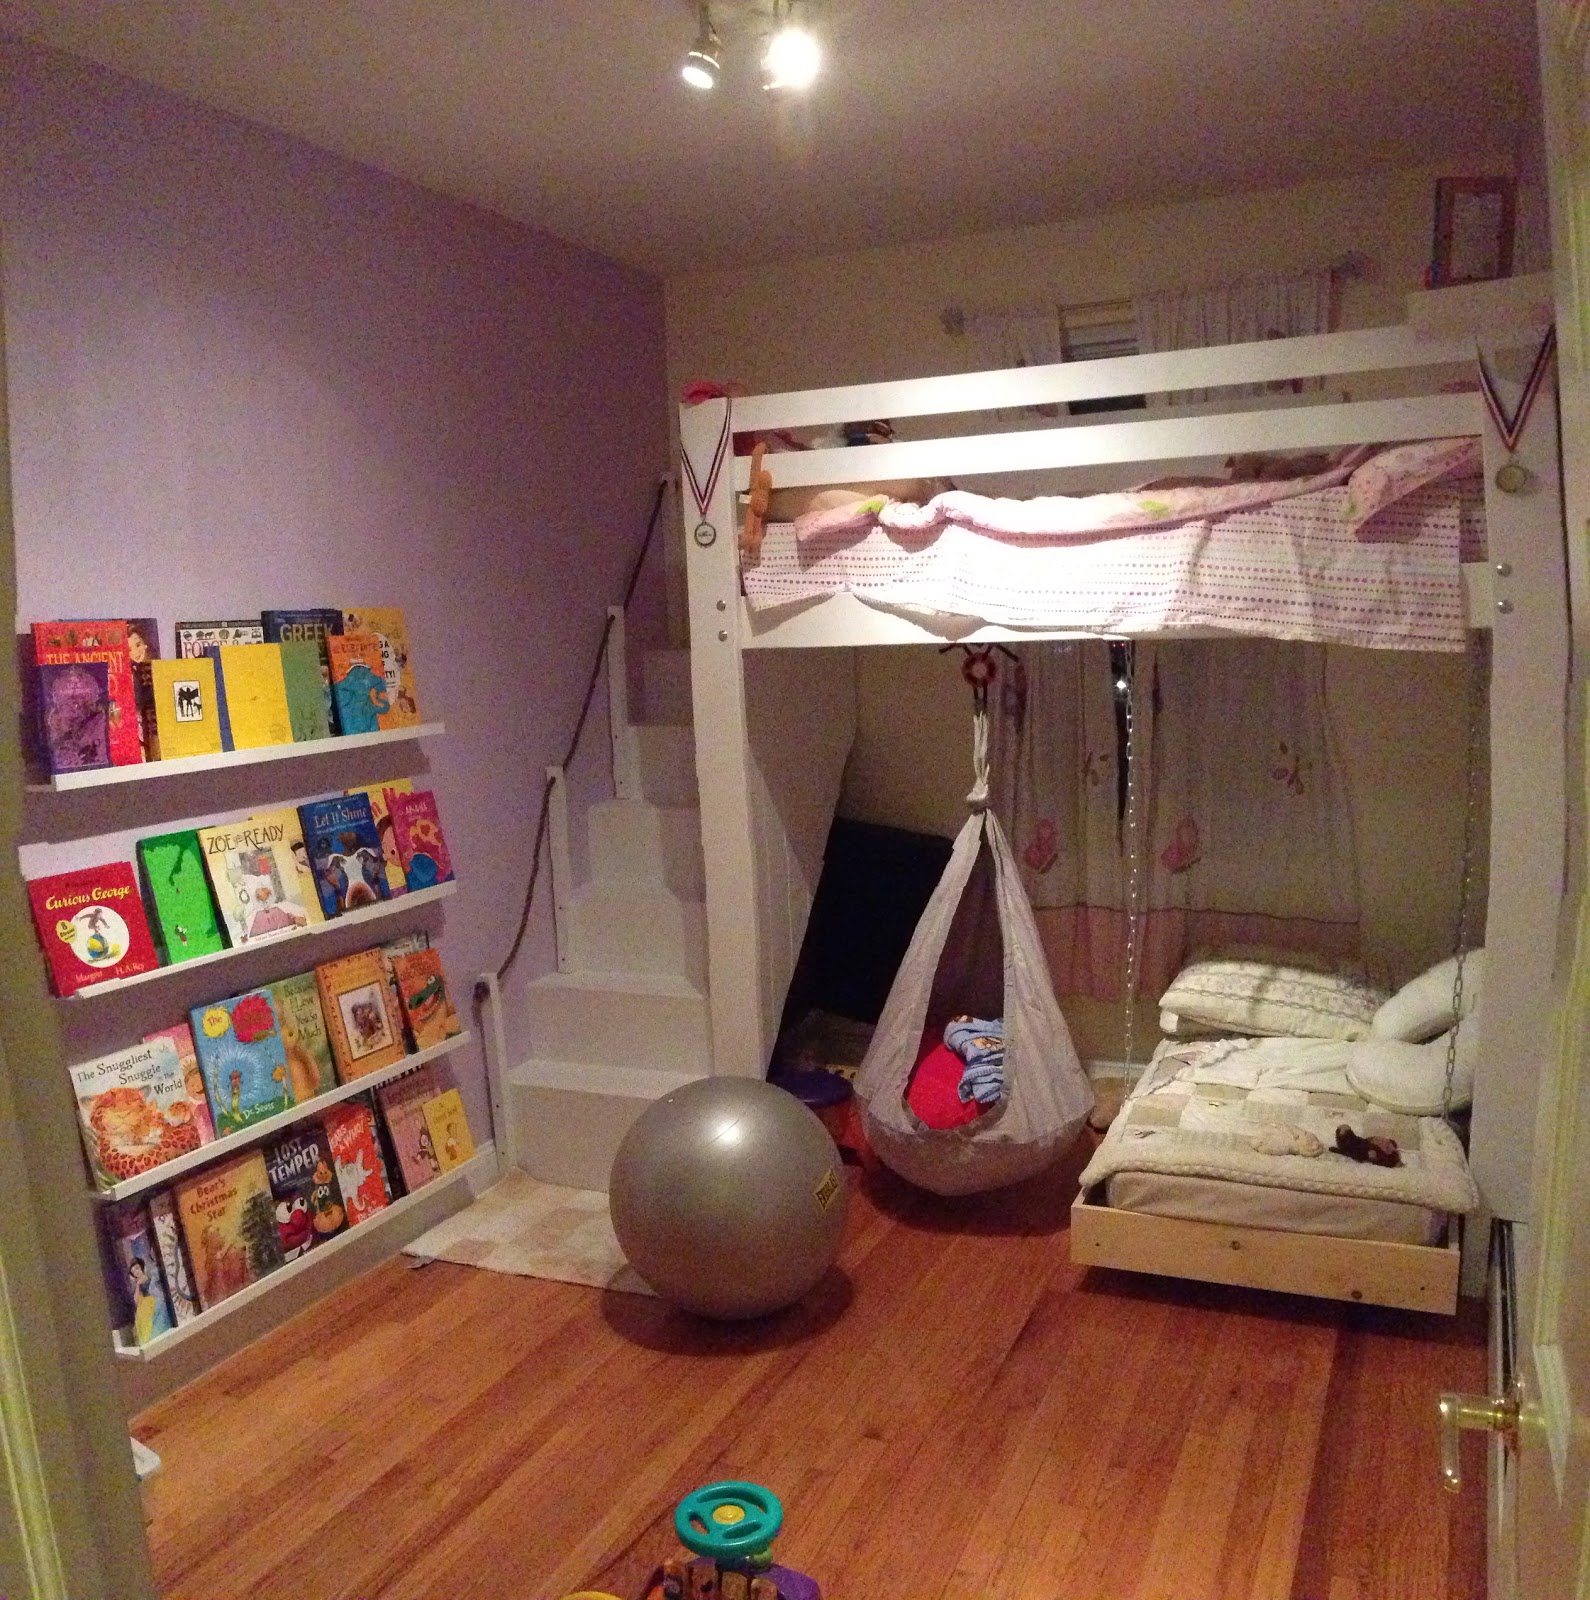  Space: Loft bed, bunk bed build with hanging toddler bed and swing